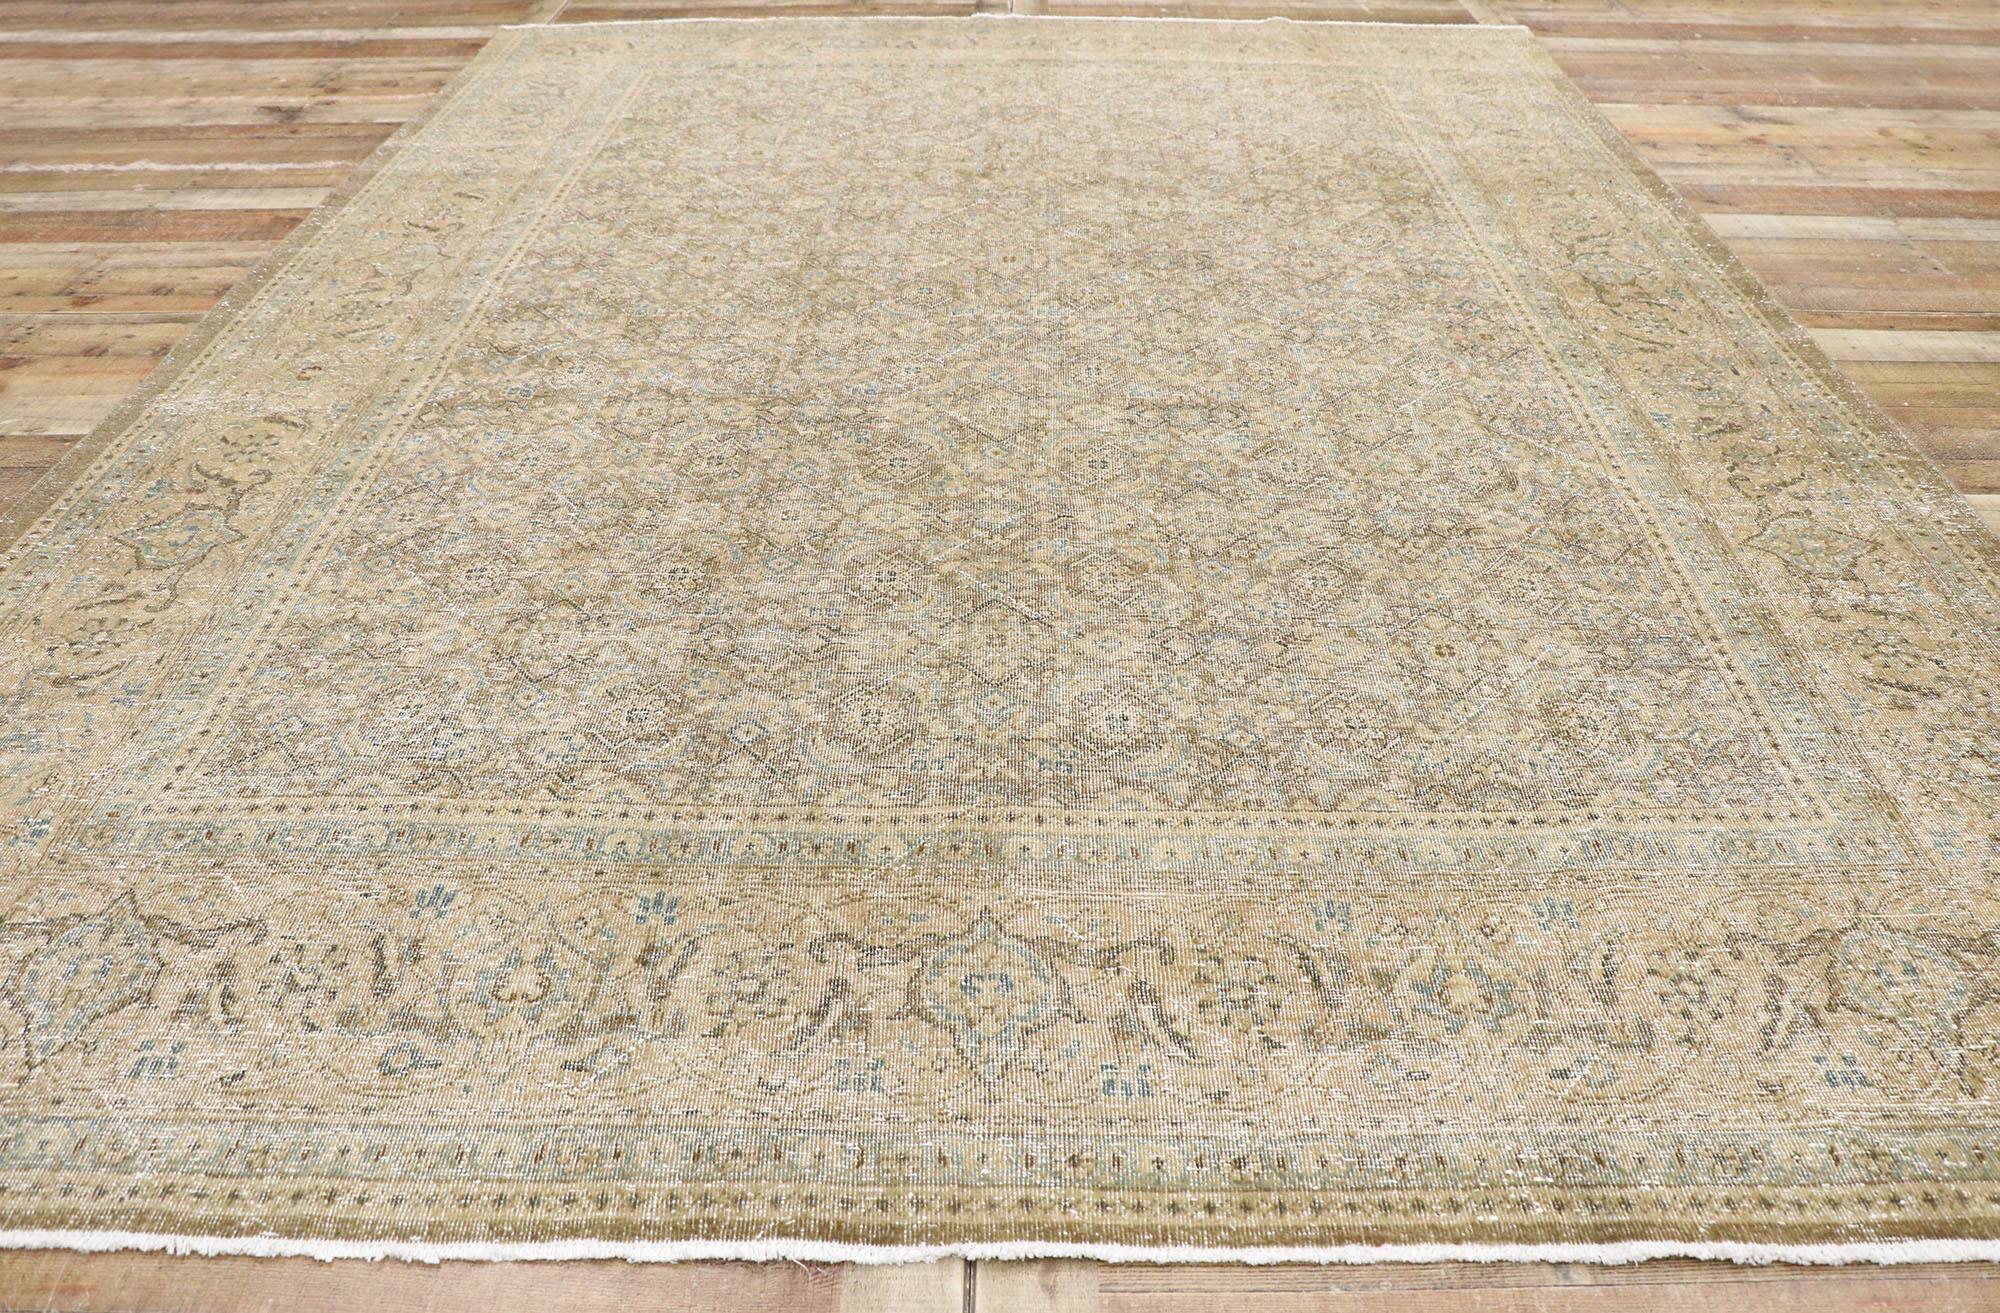 Wool Distressed Antique Persian Mahal Rug with Modern Rustic Shaker Style